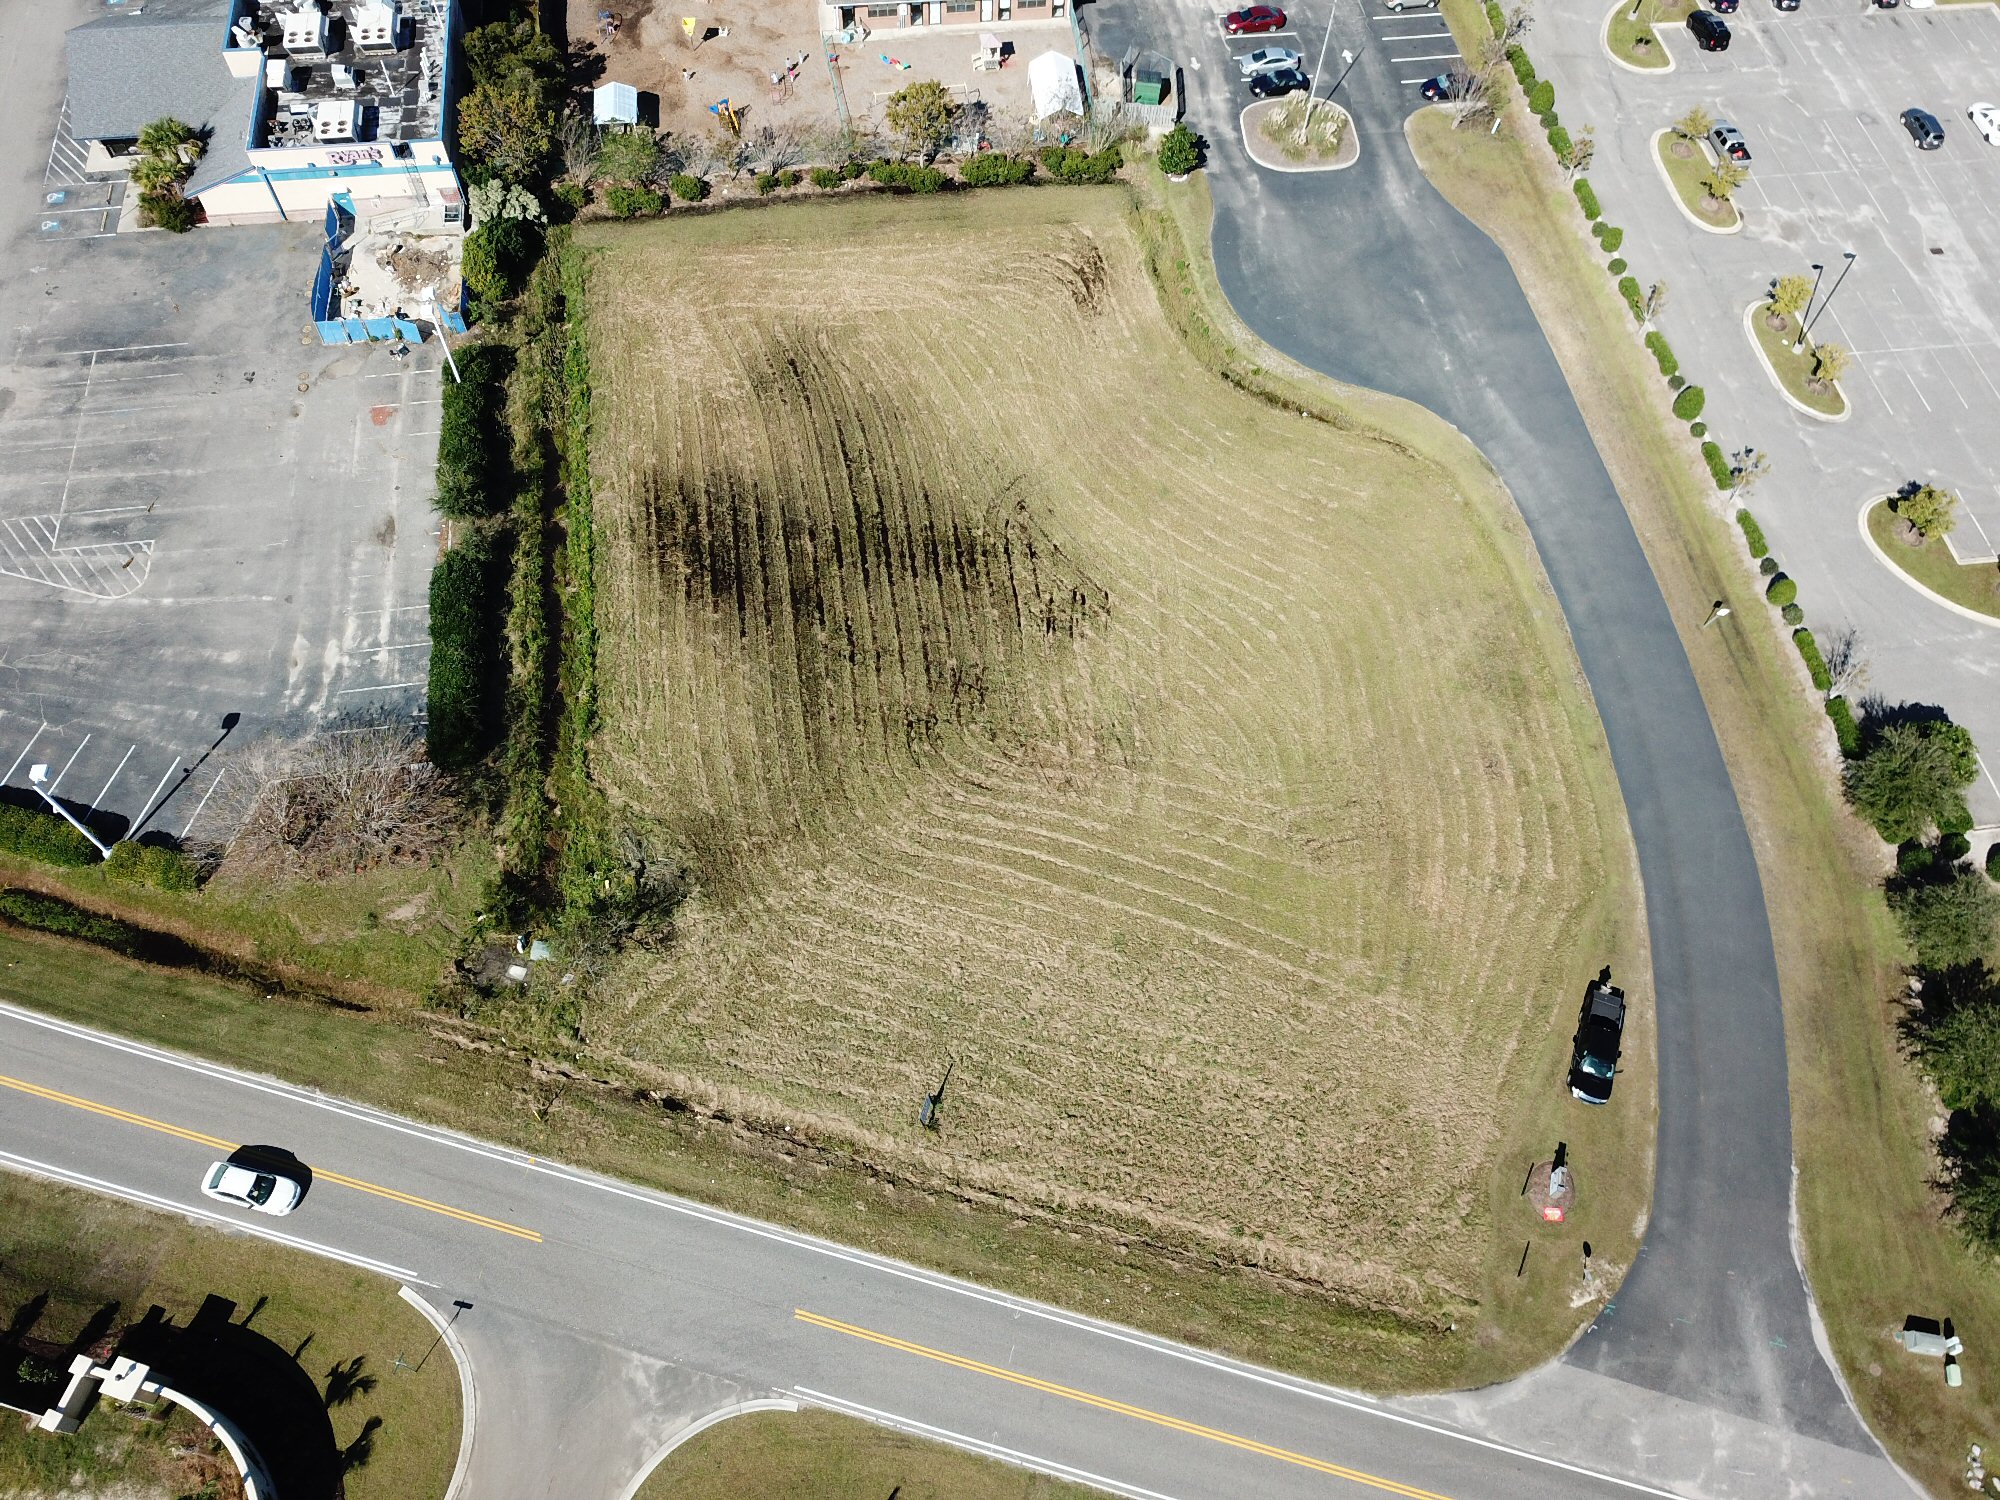 Wal-Mart Tract Parcel B Drone Image 3